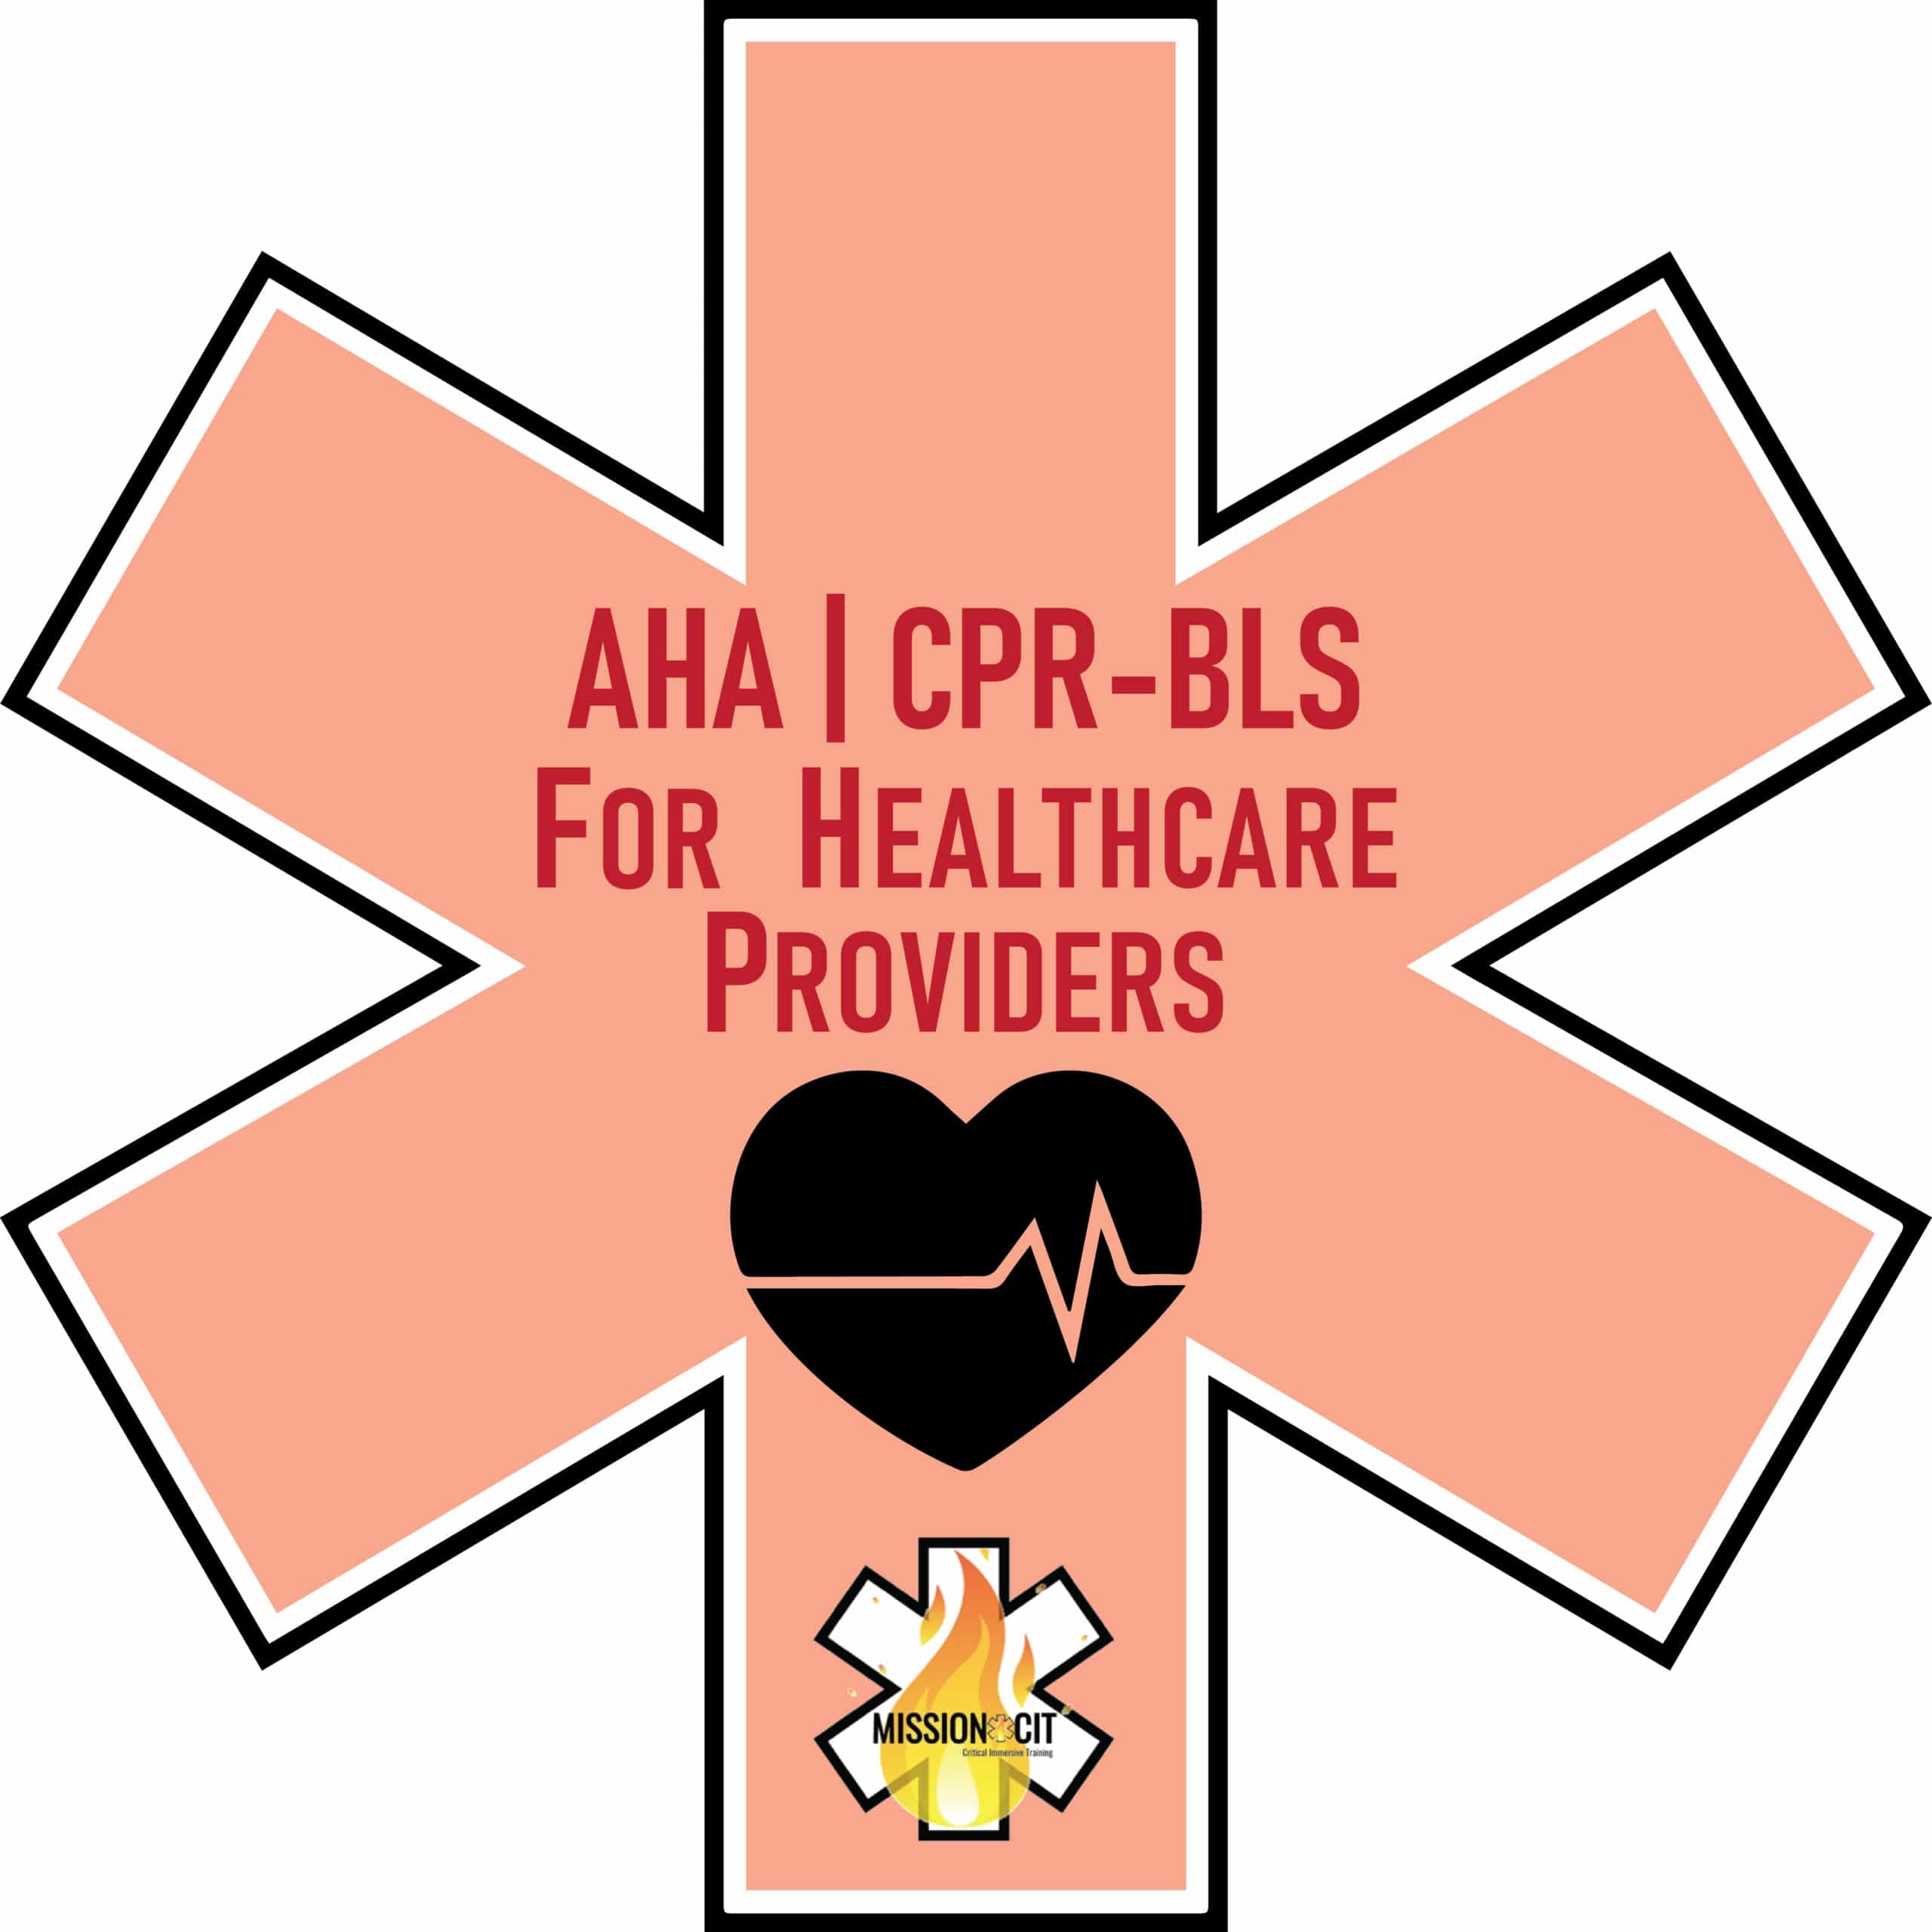 AHA | CPR-BLS for Healthcare Providers